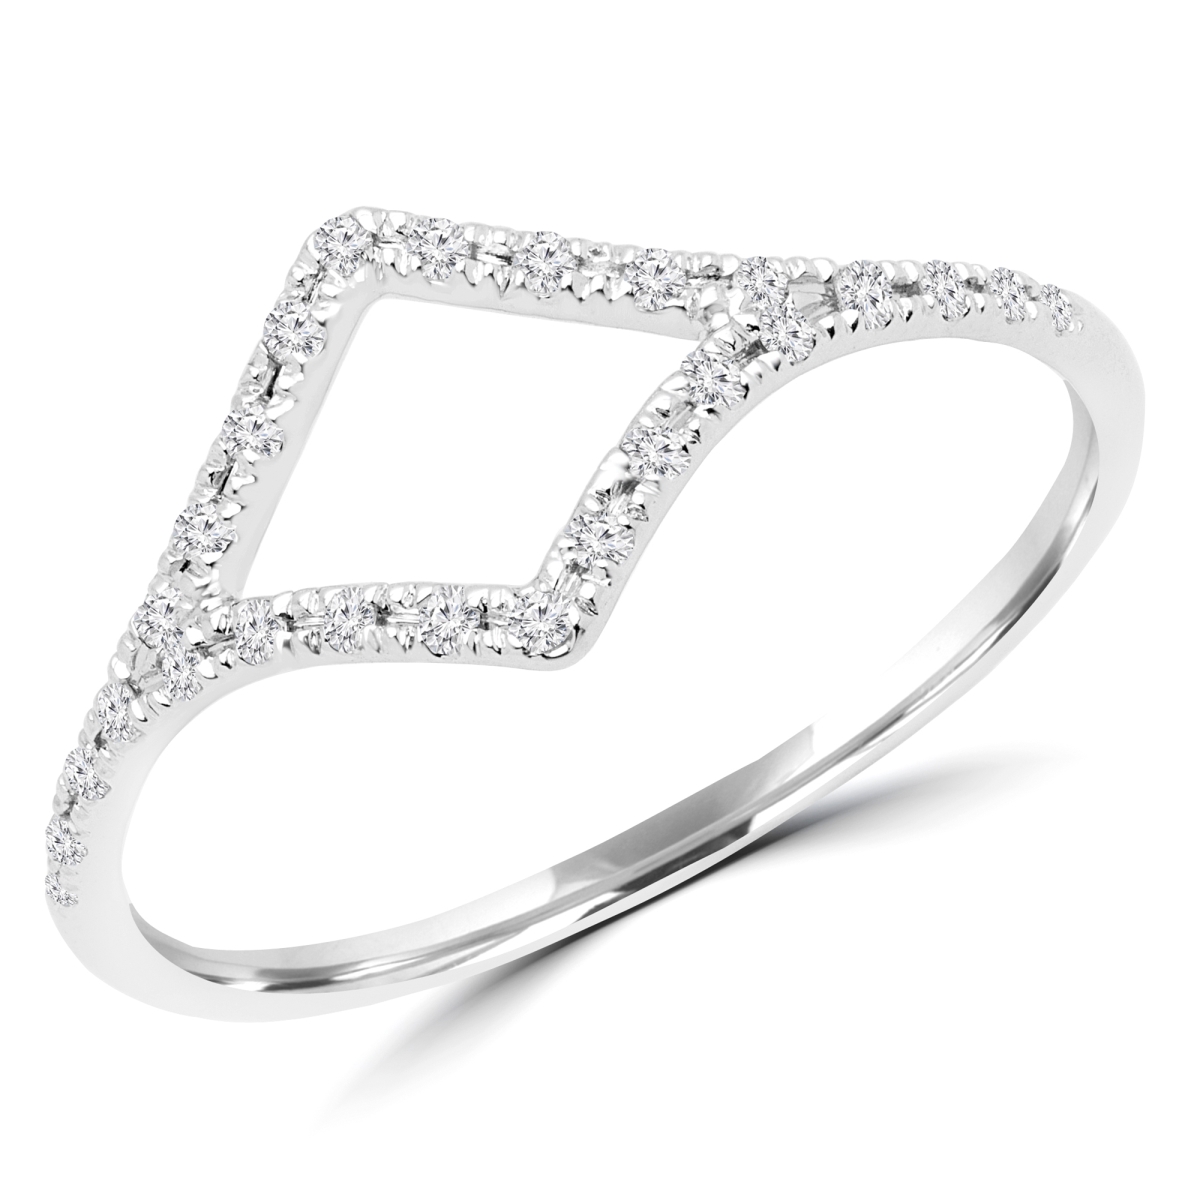 Picture of Majesty Diamonds MDR170053-3 0.1 CTW Round Diamond Cocktail Ring in 14K White Gold - 3